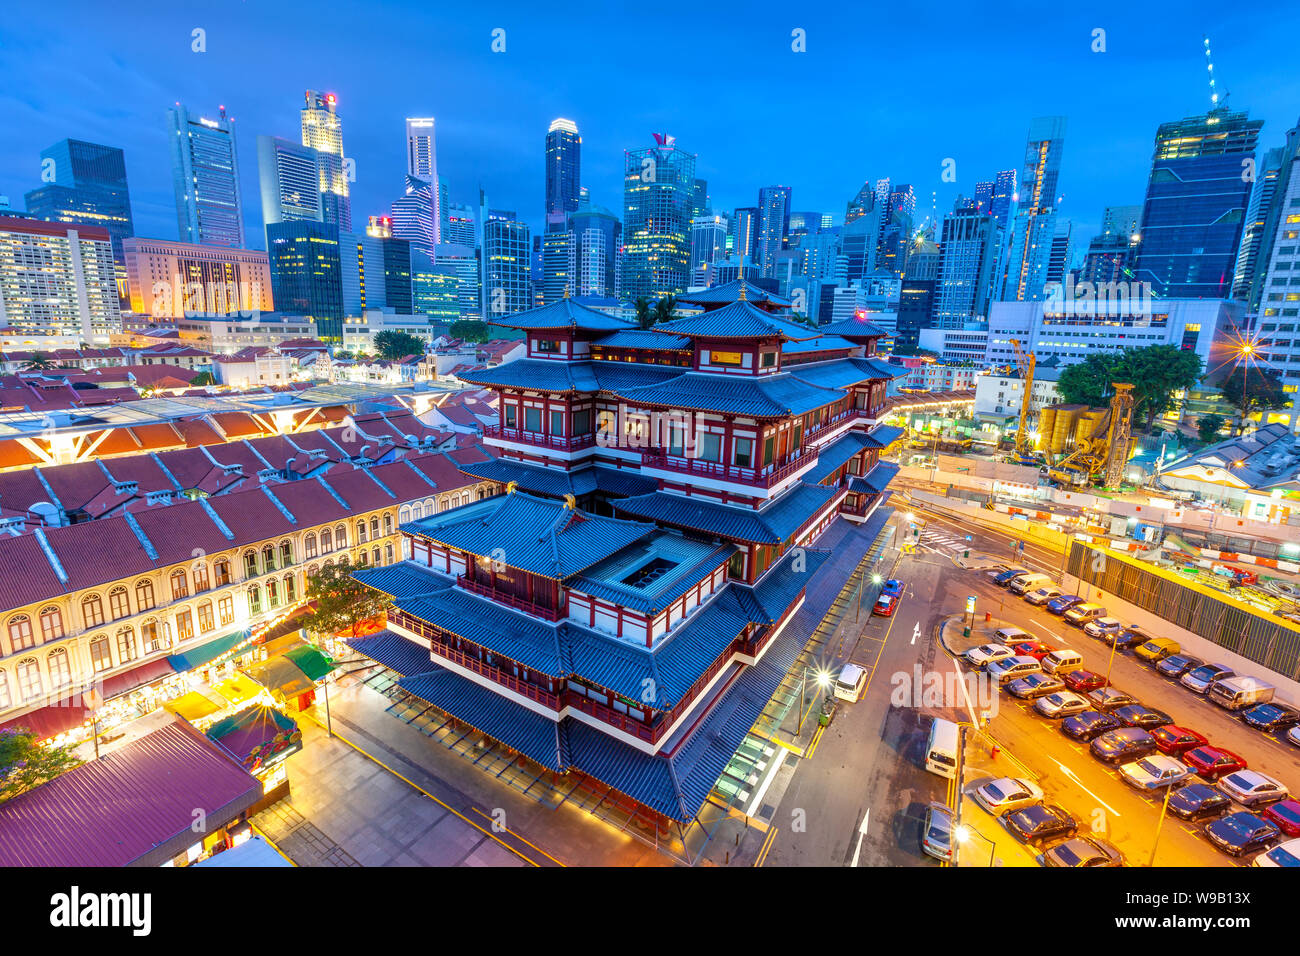 The Buddha Tooth Relic Temple in Singapore at night Stock Photo